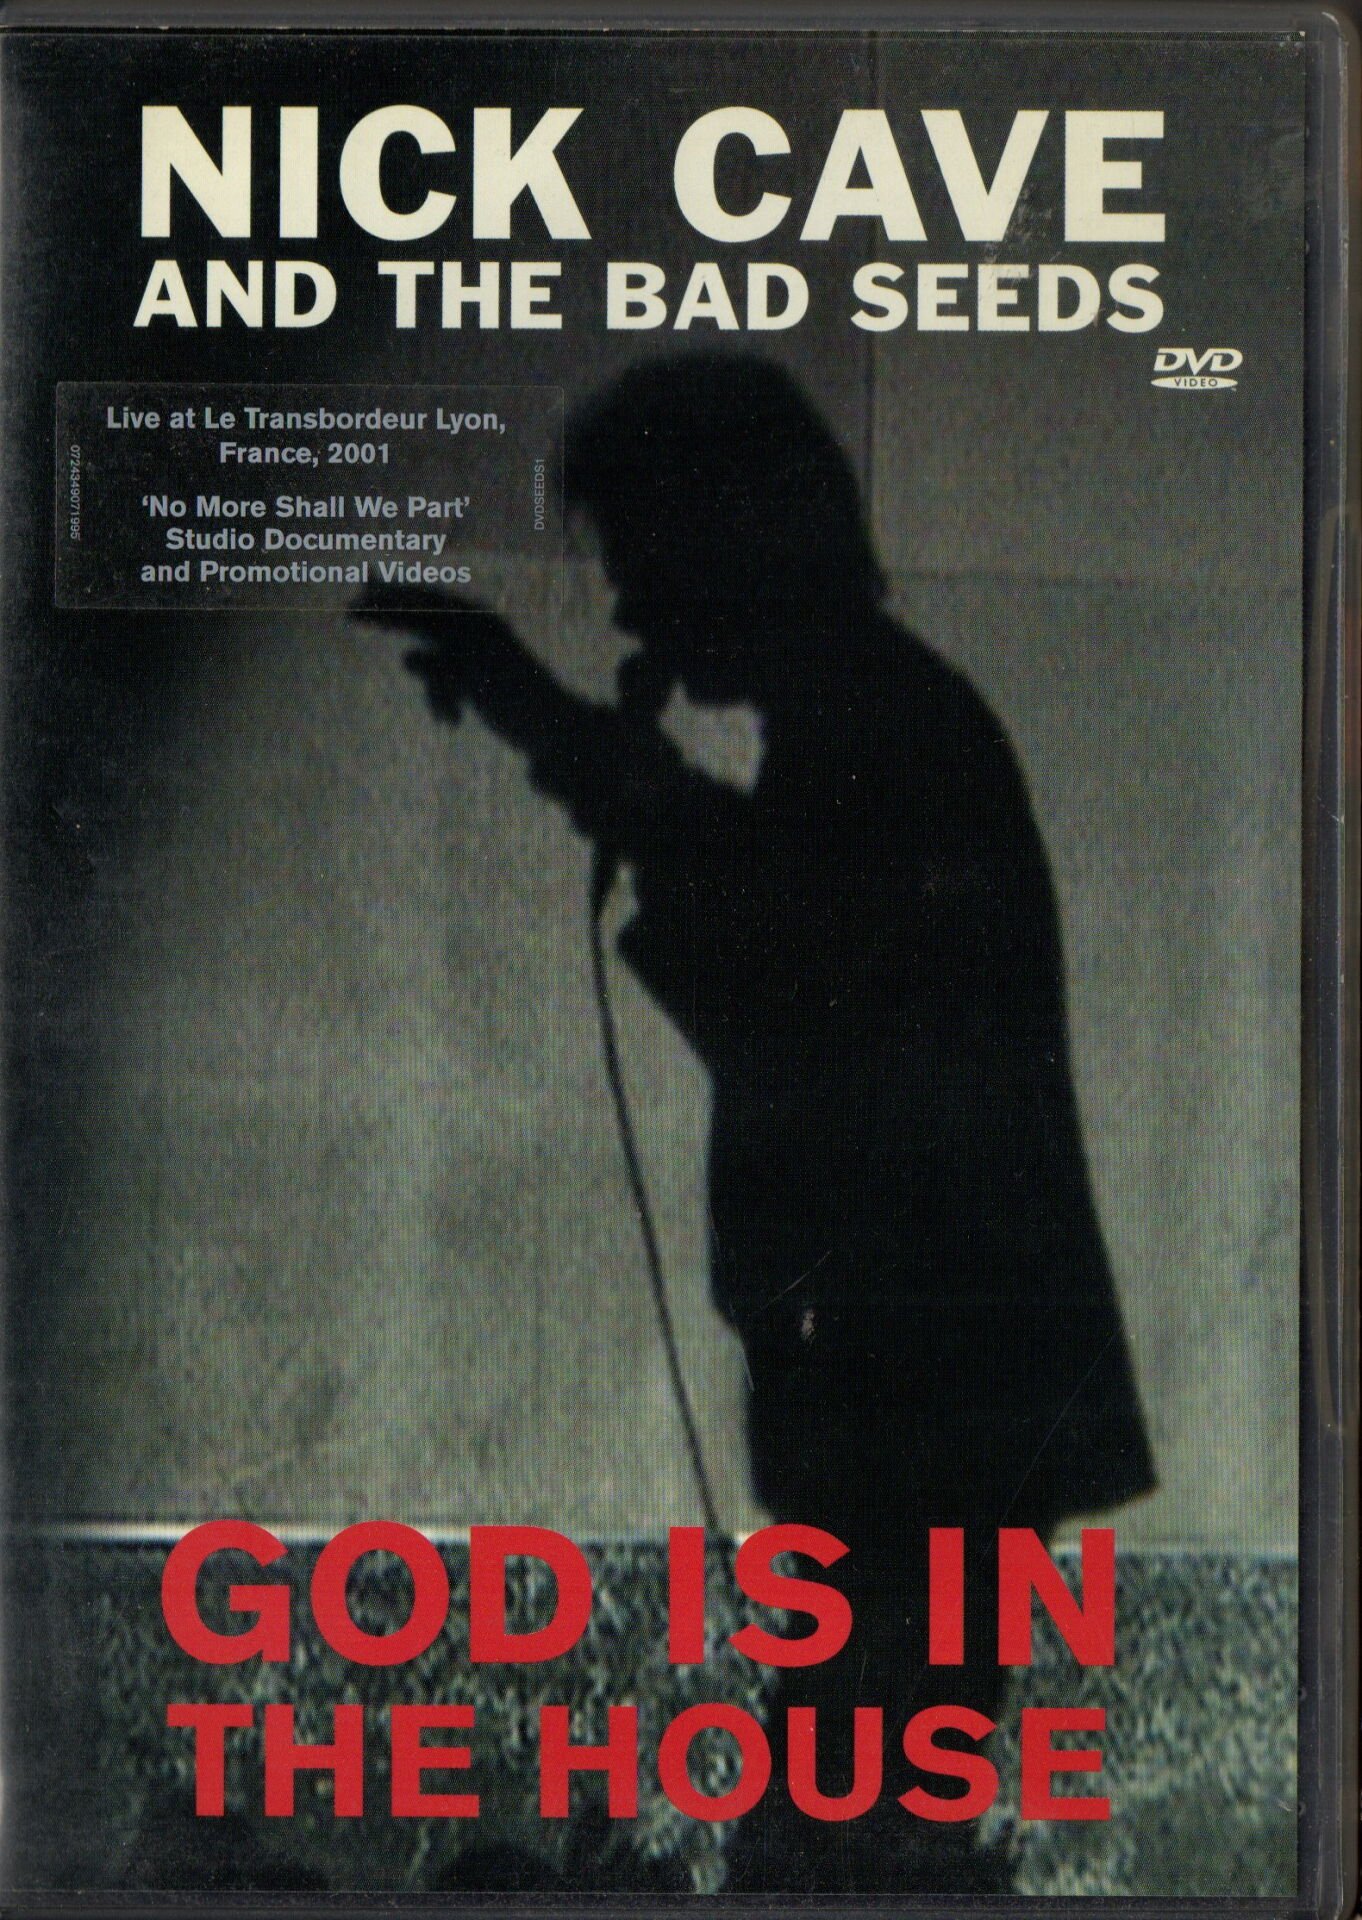 NICK CAVE AND THE BAD SEEDS – GOD IS IN THE HOUSE - DVD 2.EL